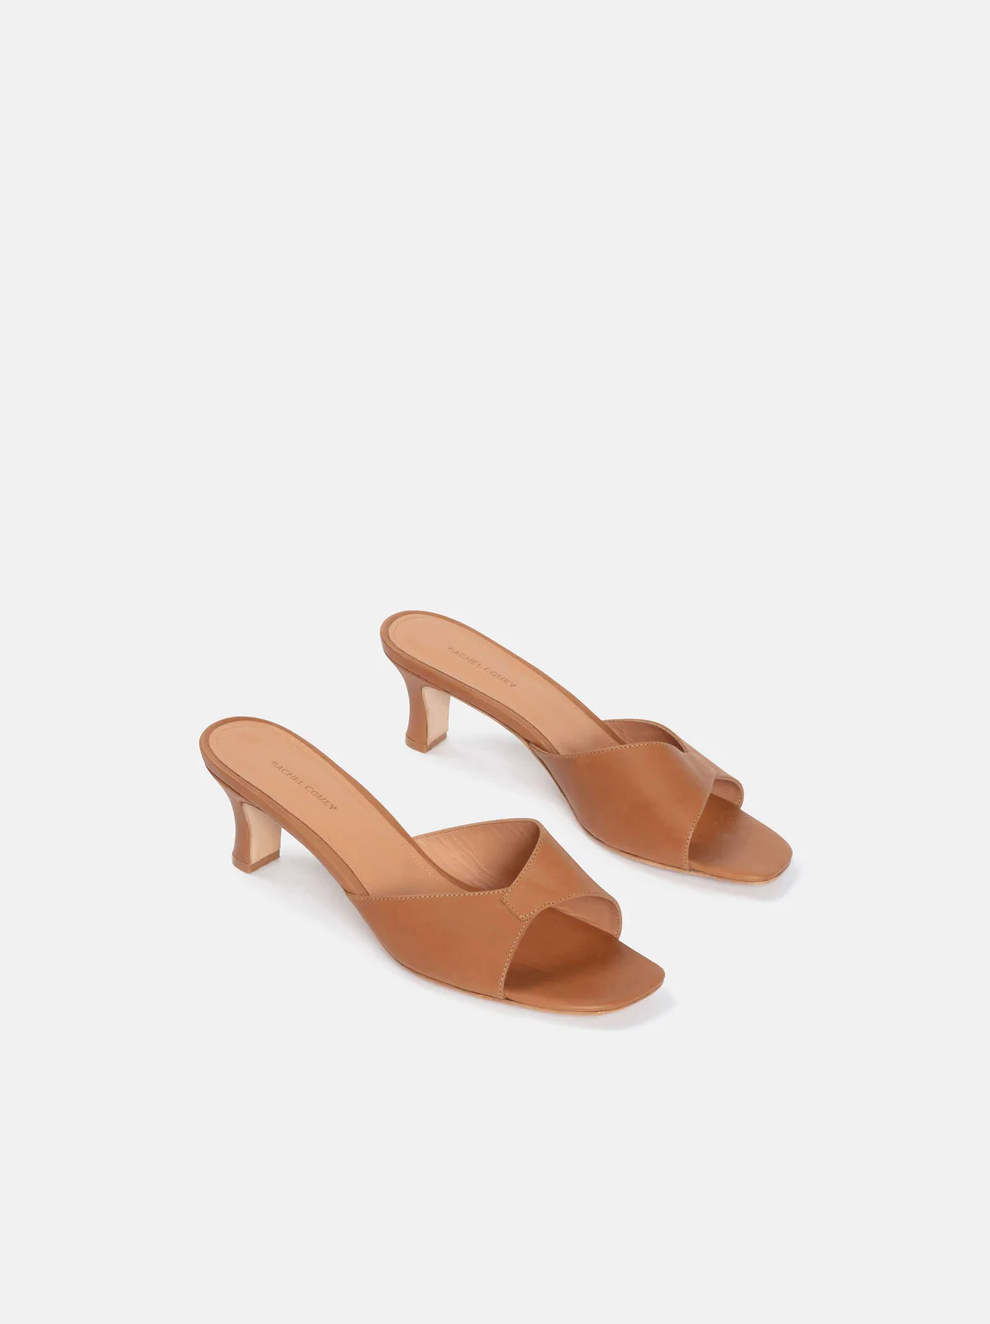 Product Image for Marin Kitten Heel, Natural